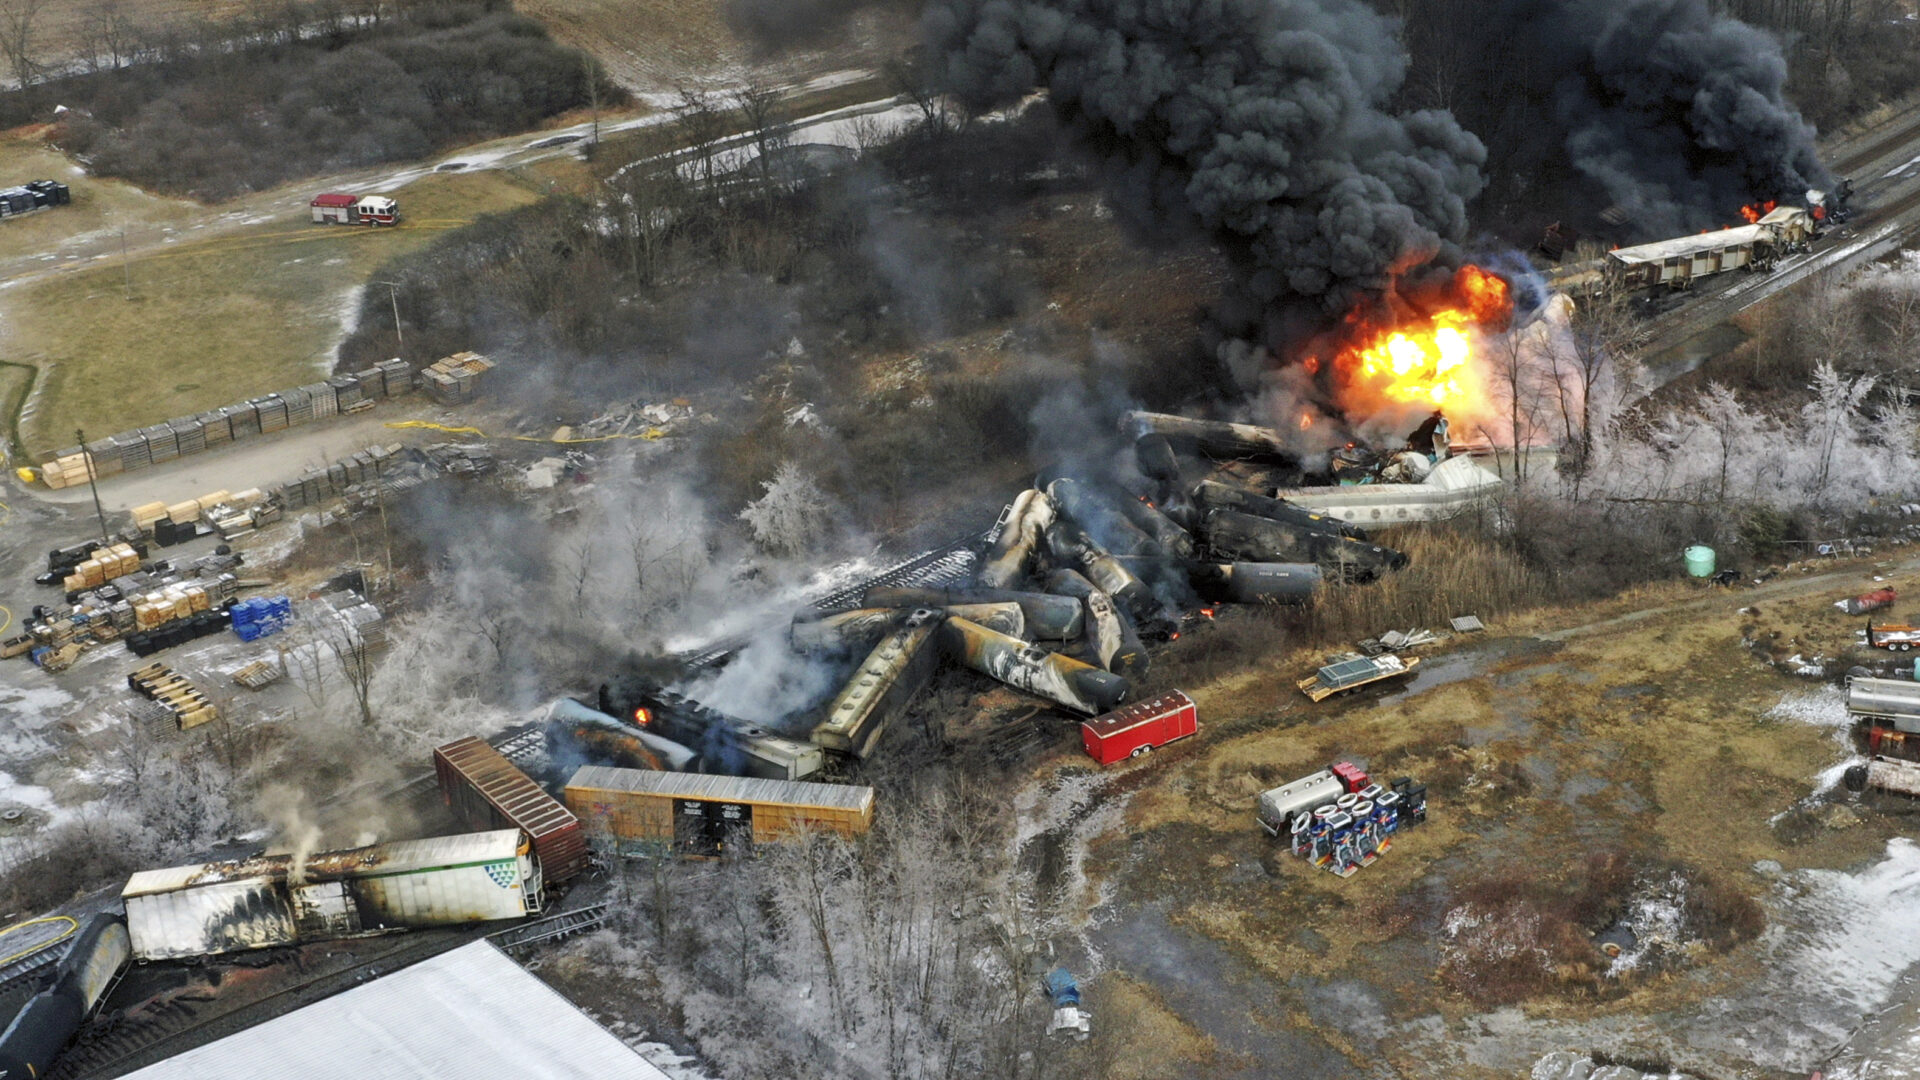 FILE - In this photo taken with a drone, portions of a Norfolk Southern freight train that derailed the previous night in East Palestine, Ohio, remain on fire at mid-day, Feb. 4, 2023. The costs associated with Norfolk Southern's fiery February derailment in Ohio have more than doubled to $803 million as the railroad works to clean up the mess and moves forward with all the related lawsuits. Norfolk Southern recorded another $416 million charge related to the East Palestine derailment on Thursday as part of its second-quarter earnings. (AP Photo/Gene J. Puskar, File)